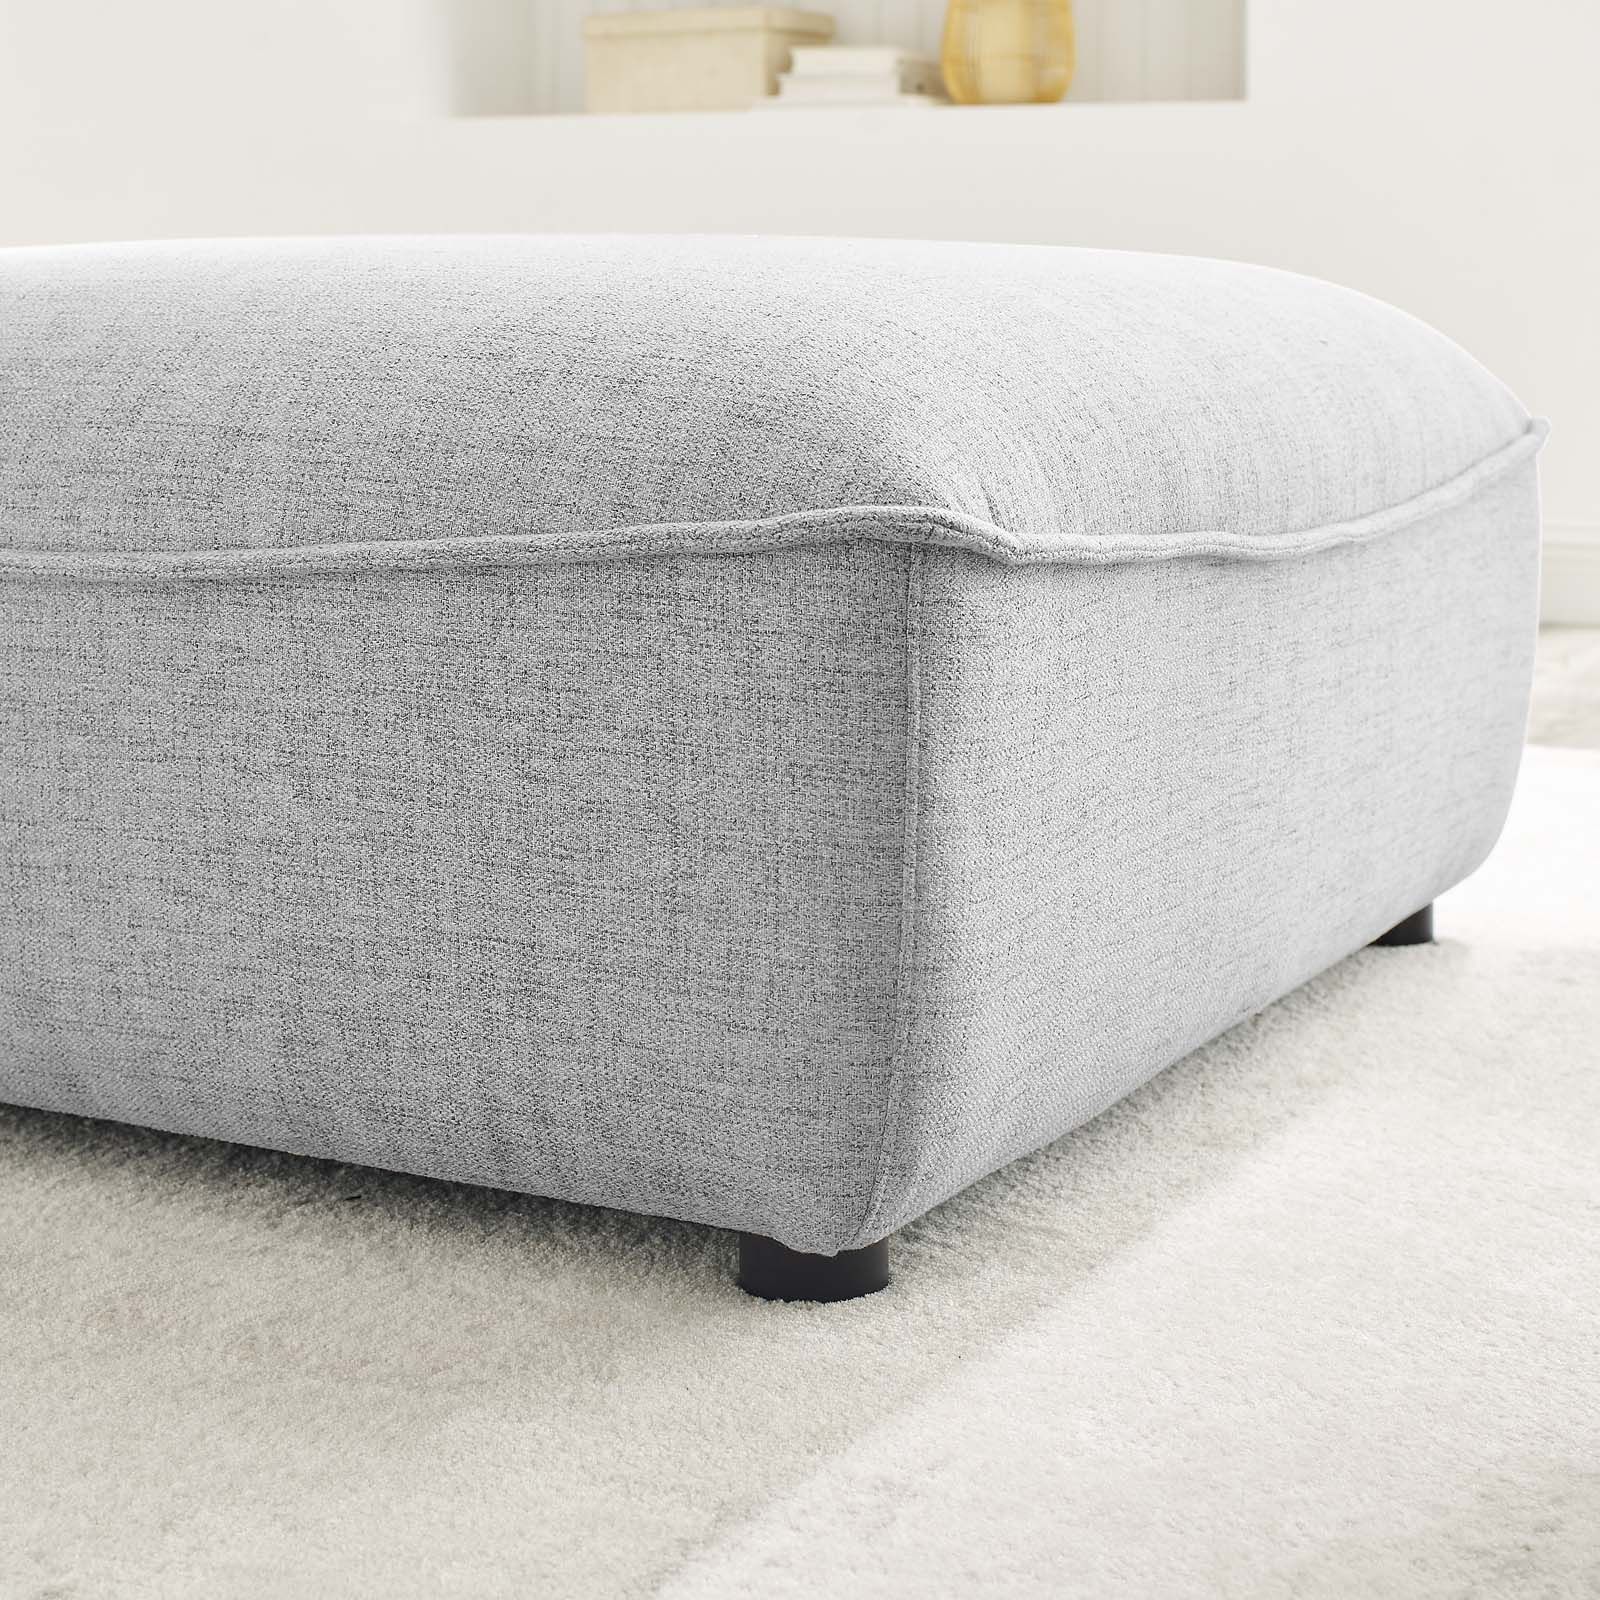 Light Gray Cylinder Pouf Ottomans With Well Known Comprise Sectional Sofa Ottoman Light Gray (View 2 of 10)